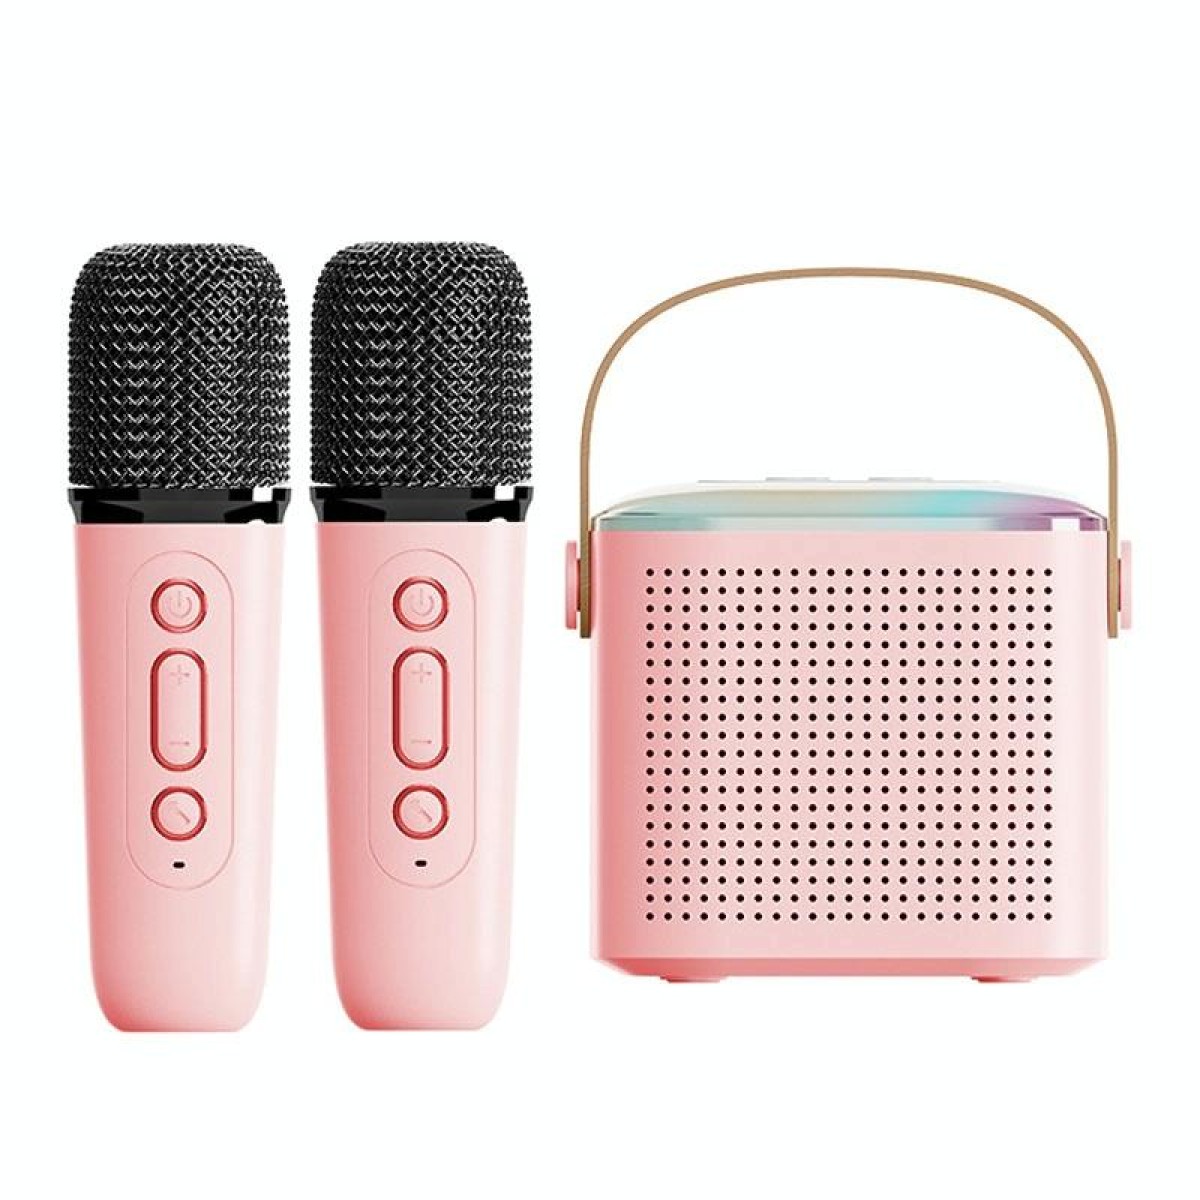 Home Portable Bluetooth Speaker Small Outdoor Karaoke Audio, Color: Y1 Pink(Double wheat)